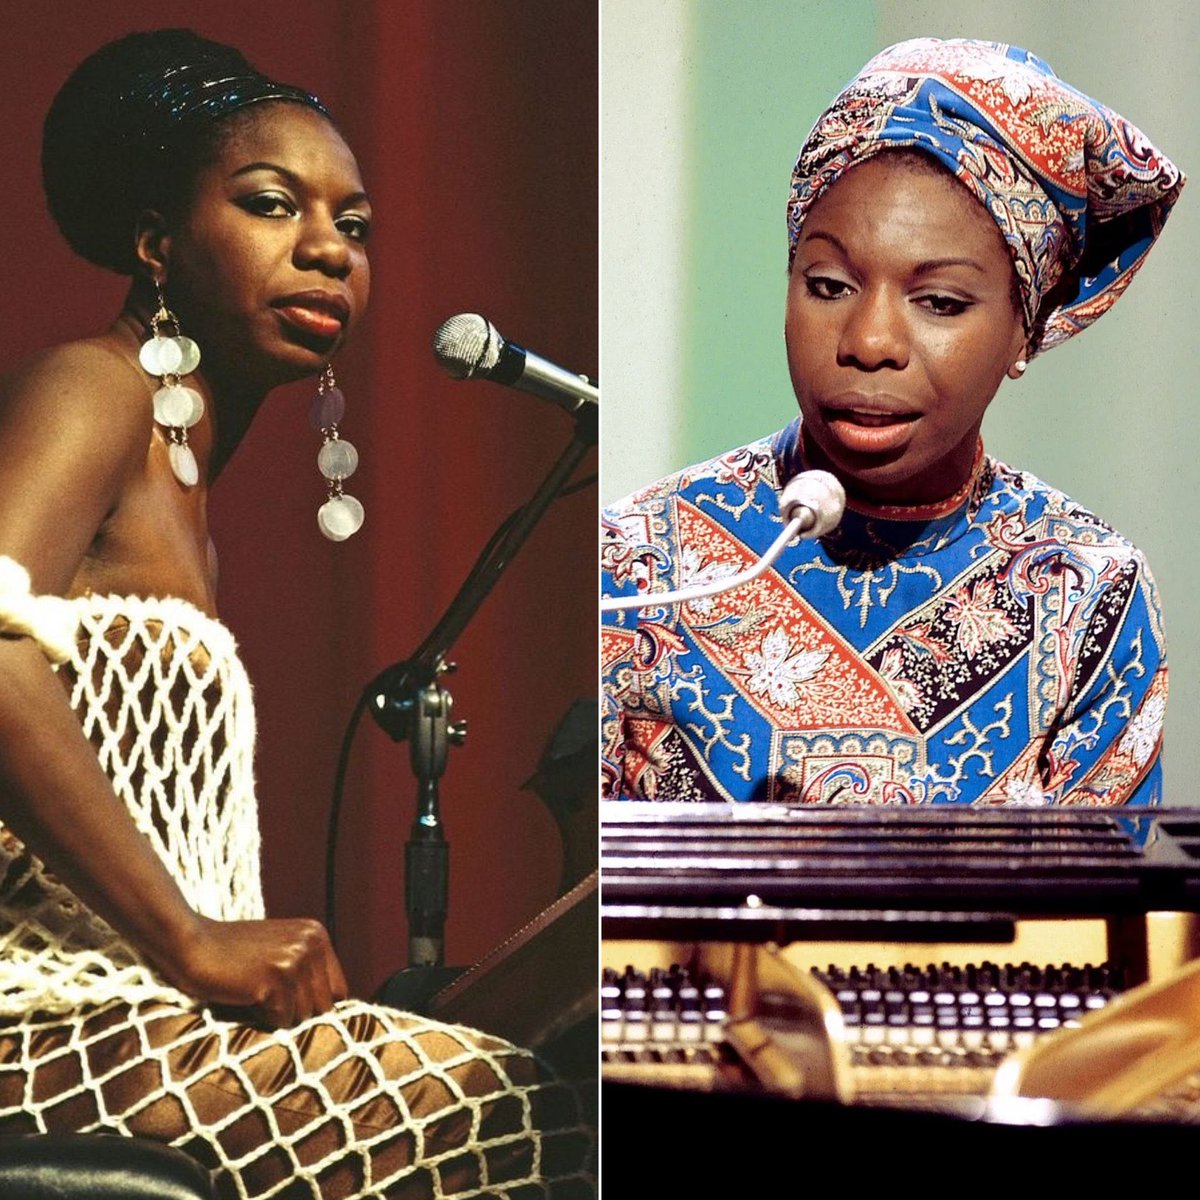 On this day in 1933, the legendary, iconic, singer and activist Nina Simone was born.